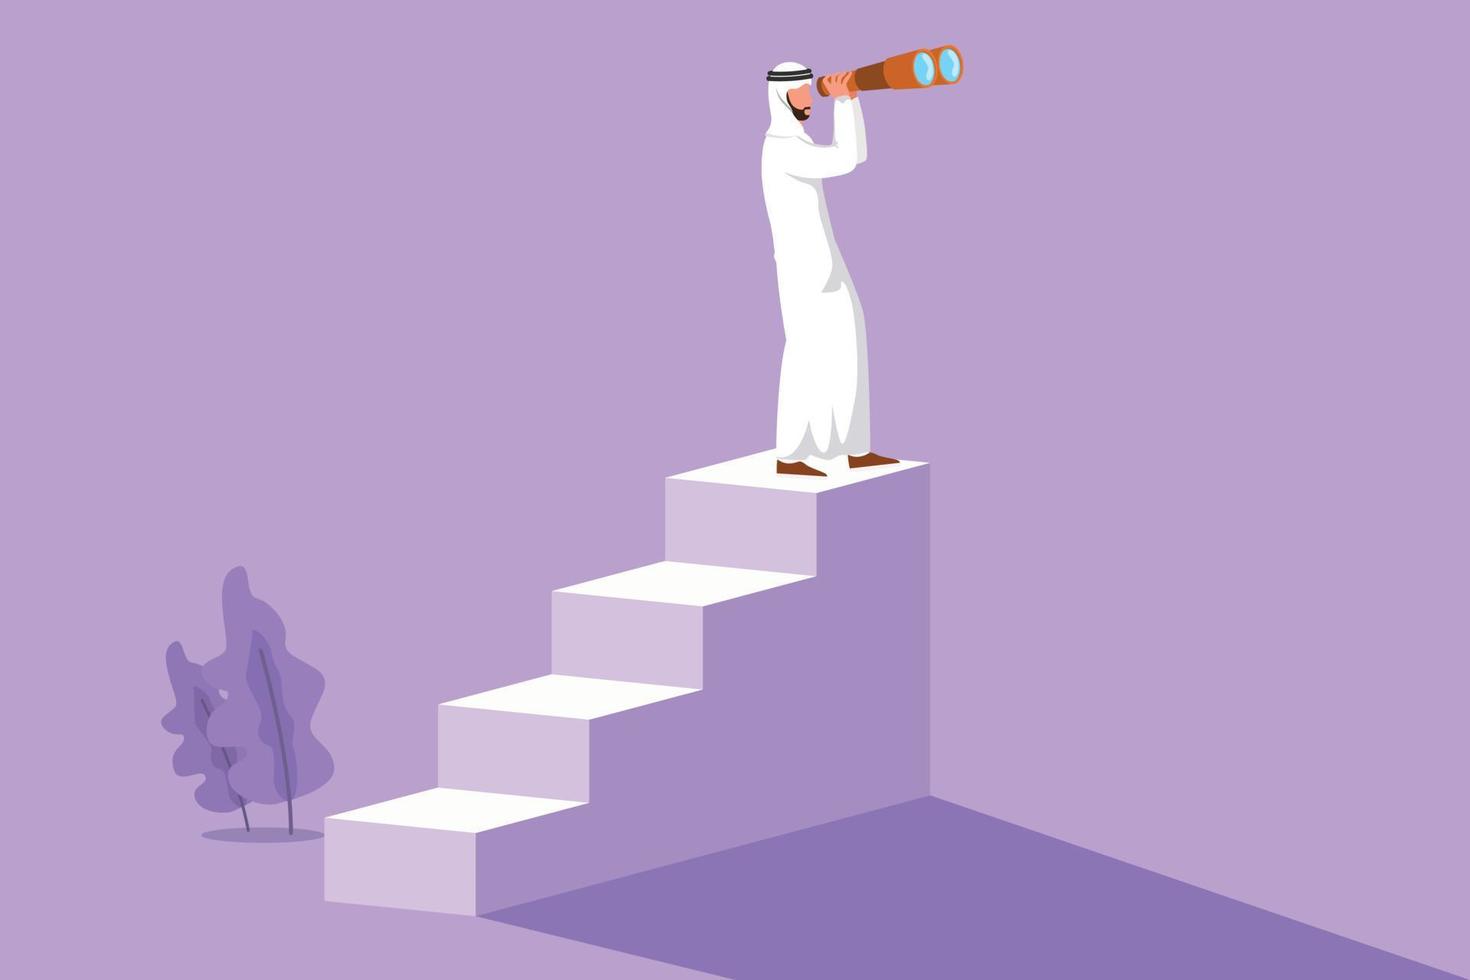 Graphic flat design drawing Arabian businessman standing on stairs with binoculars. Vision concept in business. Symbol of leadership, strategy, mission, objectives. Cartoon style vector illustration